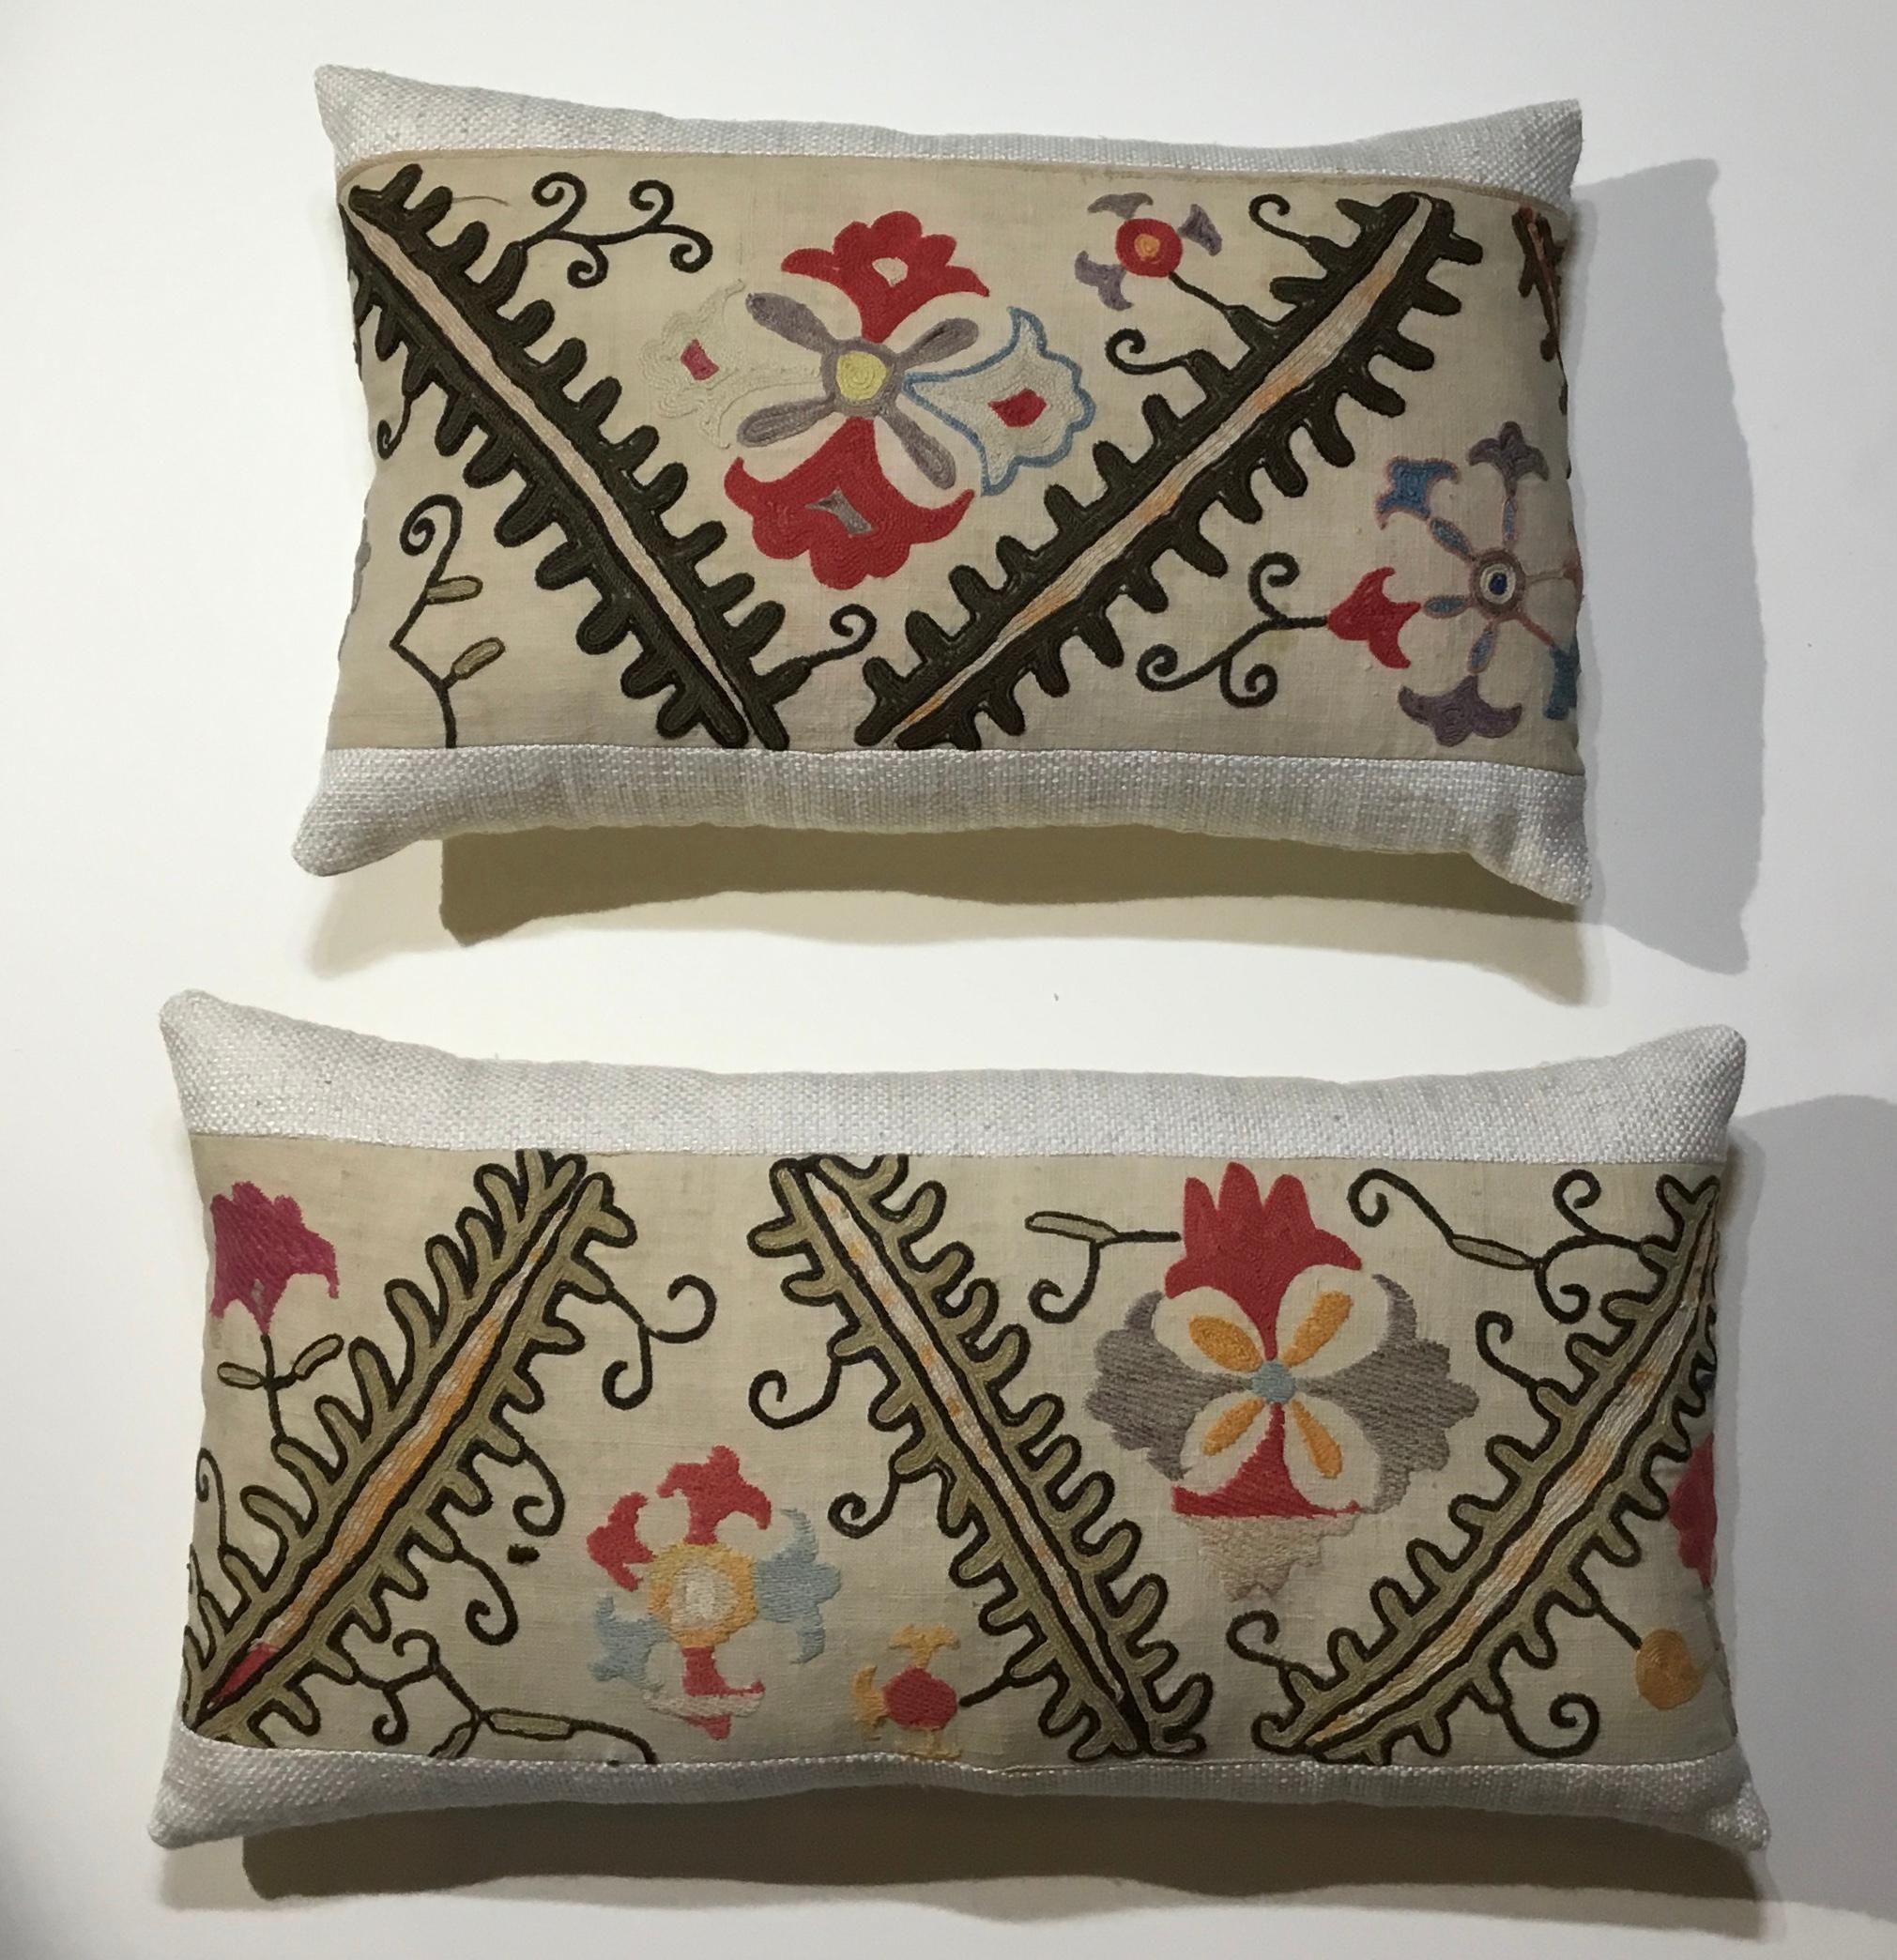 Beautiful pair of pillows made of hand embroidery on handmade cotton background, colorful motifs of vine and flowers motifs, fine cotton trimming and fine silk backing, Frash new inserts.
Size: 19” x 12” x 4”
22” x 11”.5 x 4”.
  